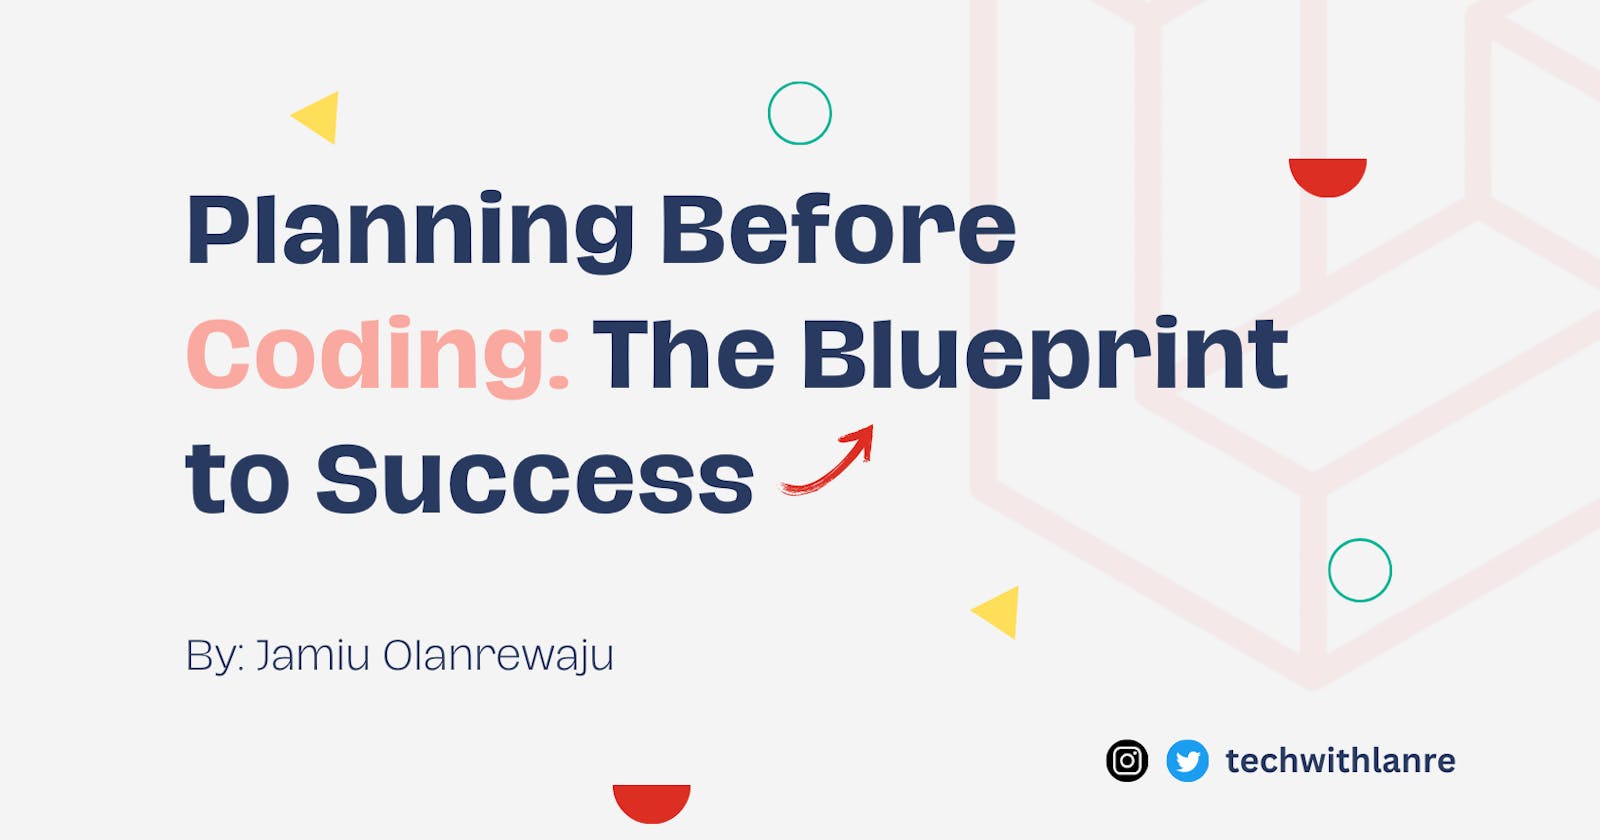 Planning Before Coding: The Blueprint for Success 🚀